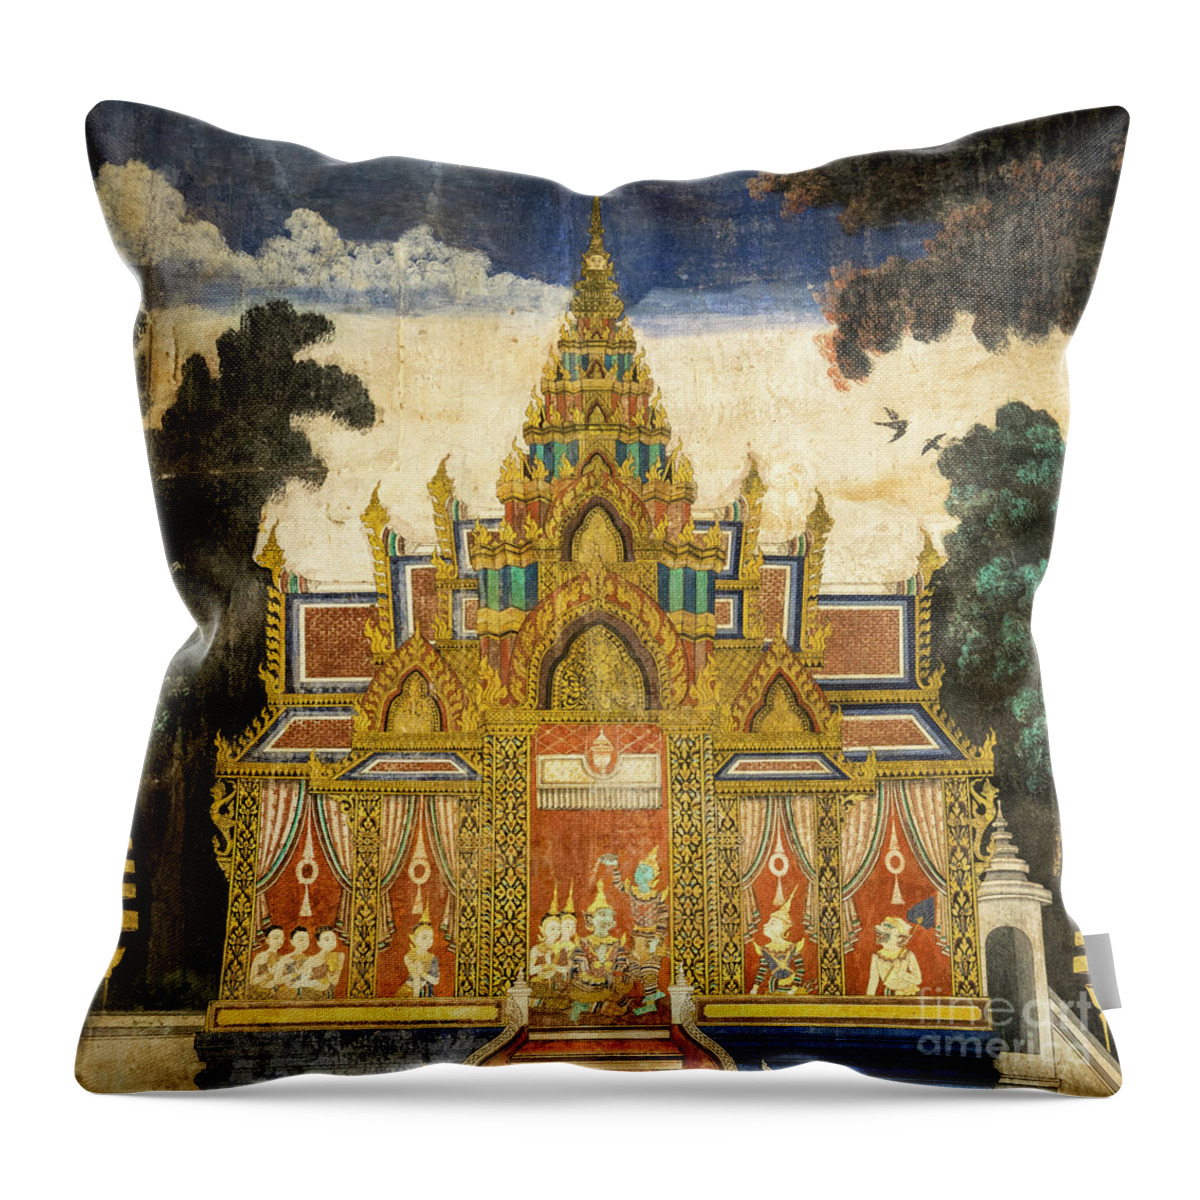 Cambodia Throw Pillow featuring the photograph Royal Palace Ramayana 17 by Rick Piper Photography